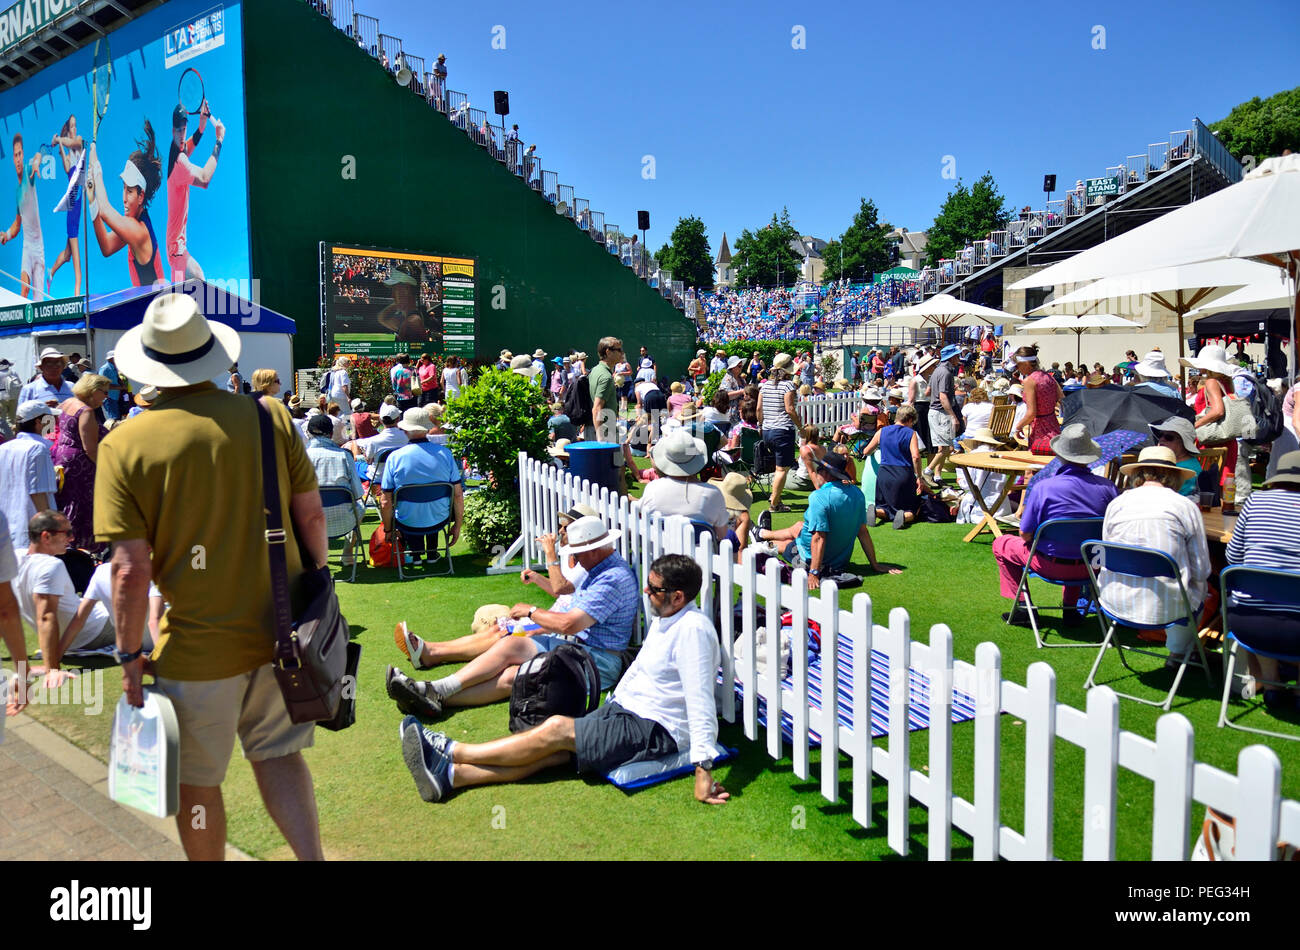 Devonshire Park Lawn Tennis Club, Eastbourne, England. Crowds in the grounds watching centre court action on a large screen Stock Photo